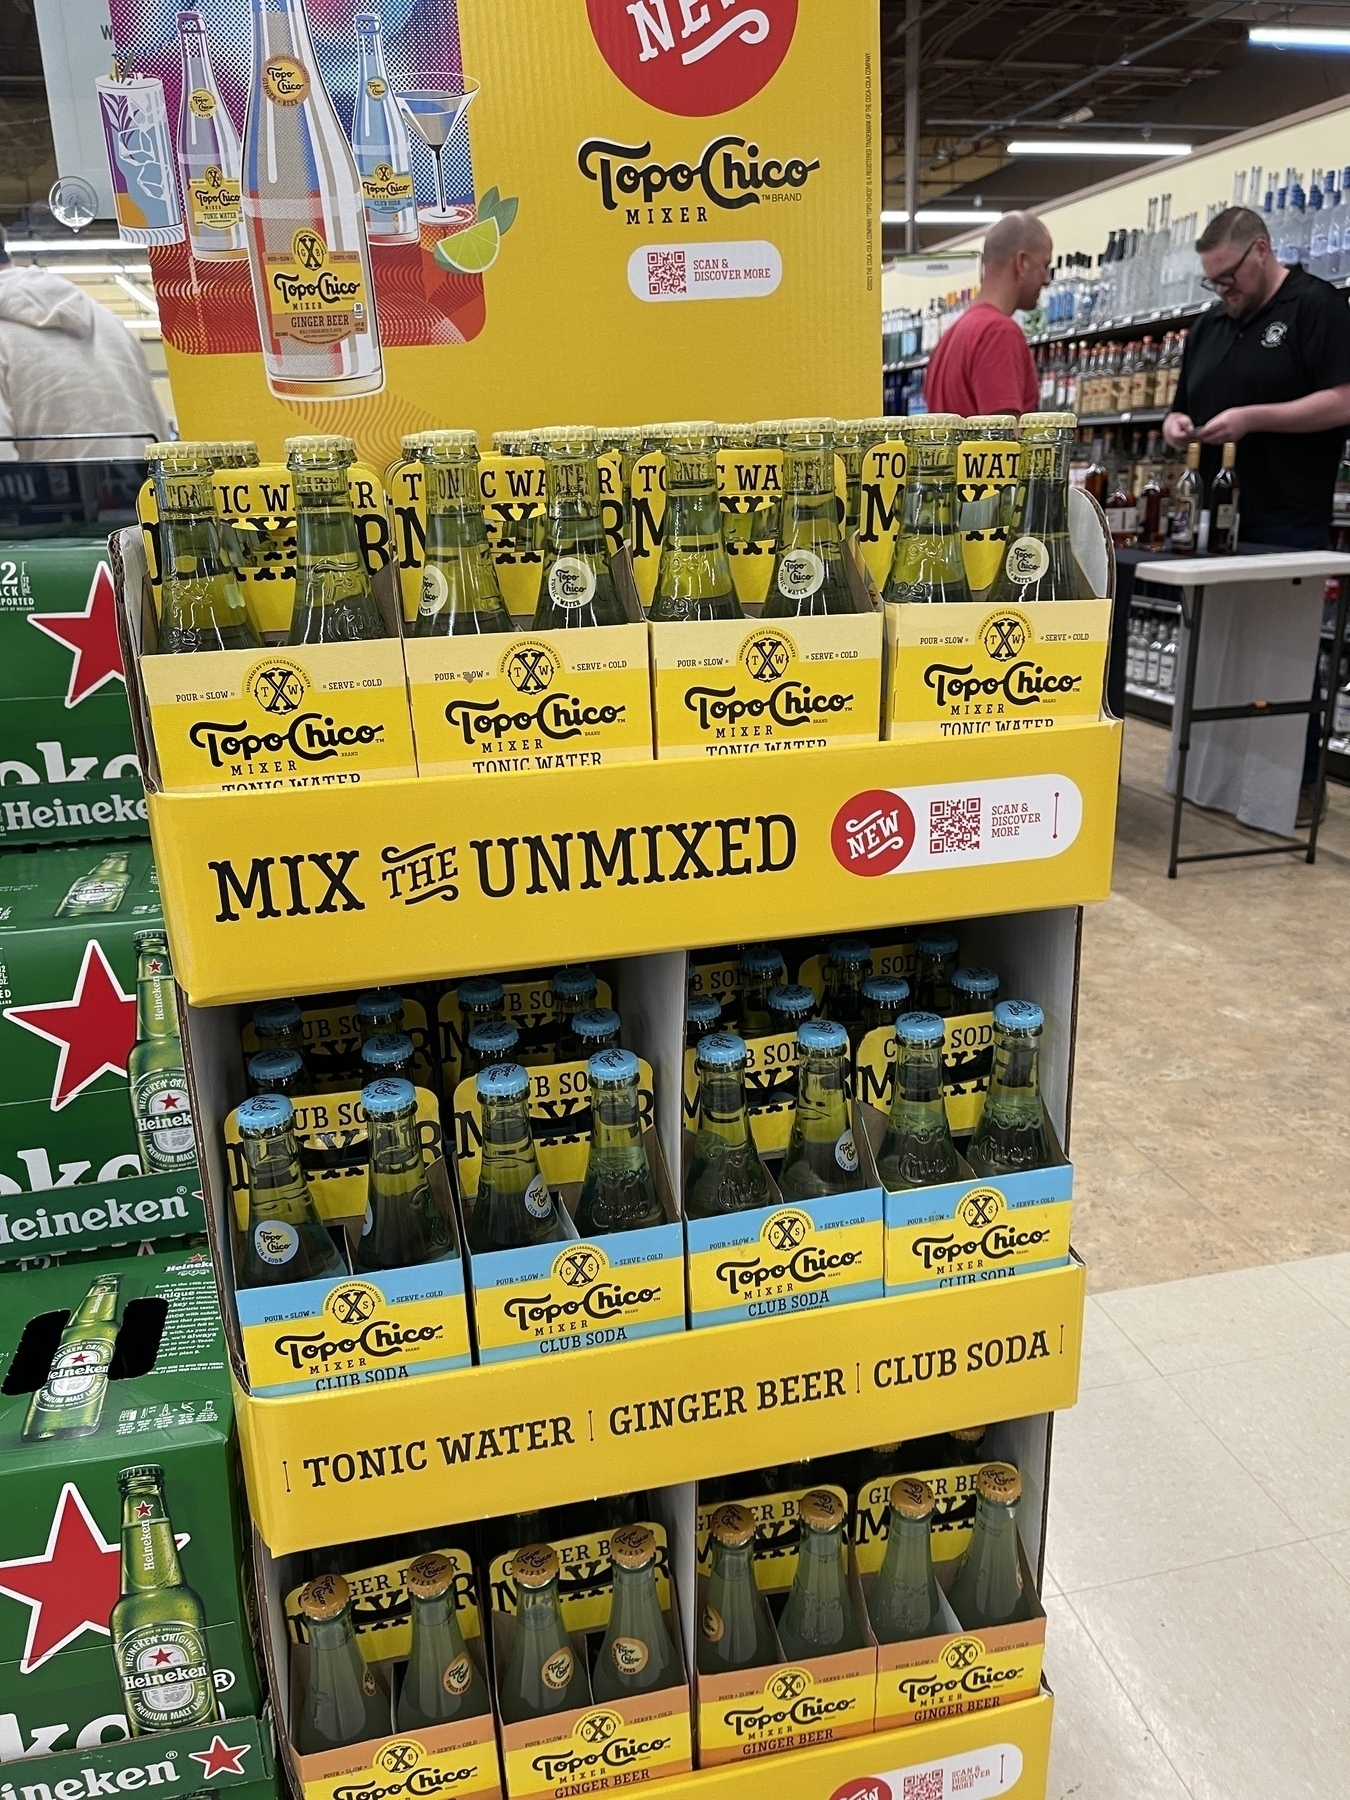 A display case of Topo Chico tonic water